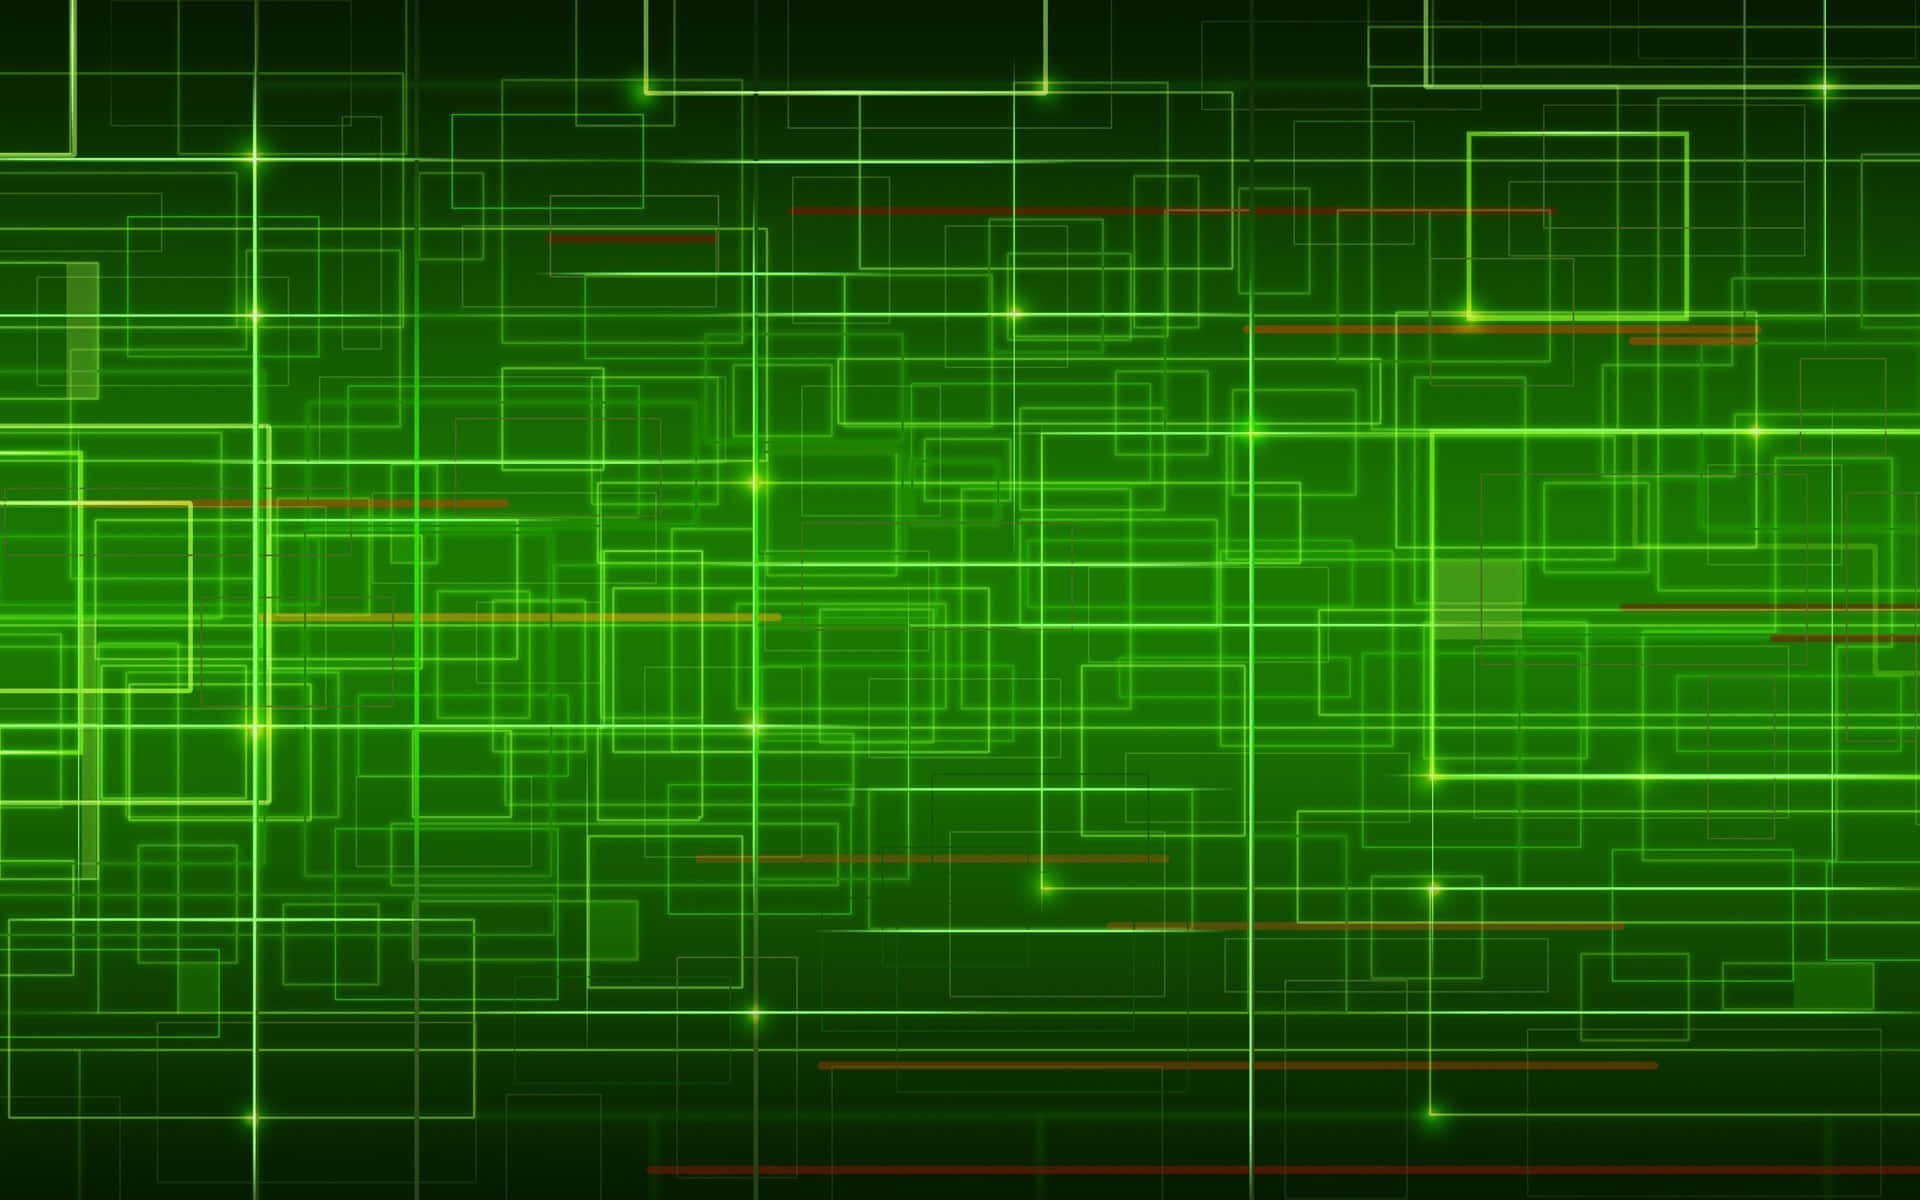 Brighten up your day with a Cool Green Background